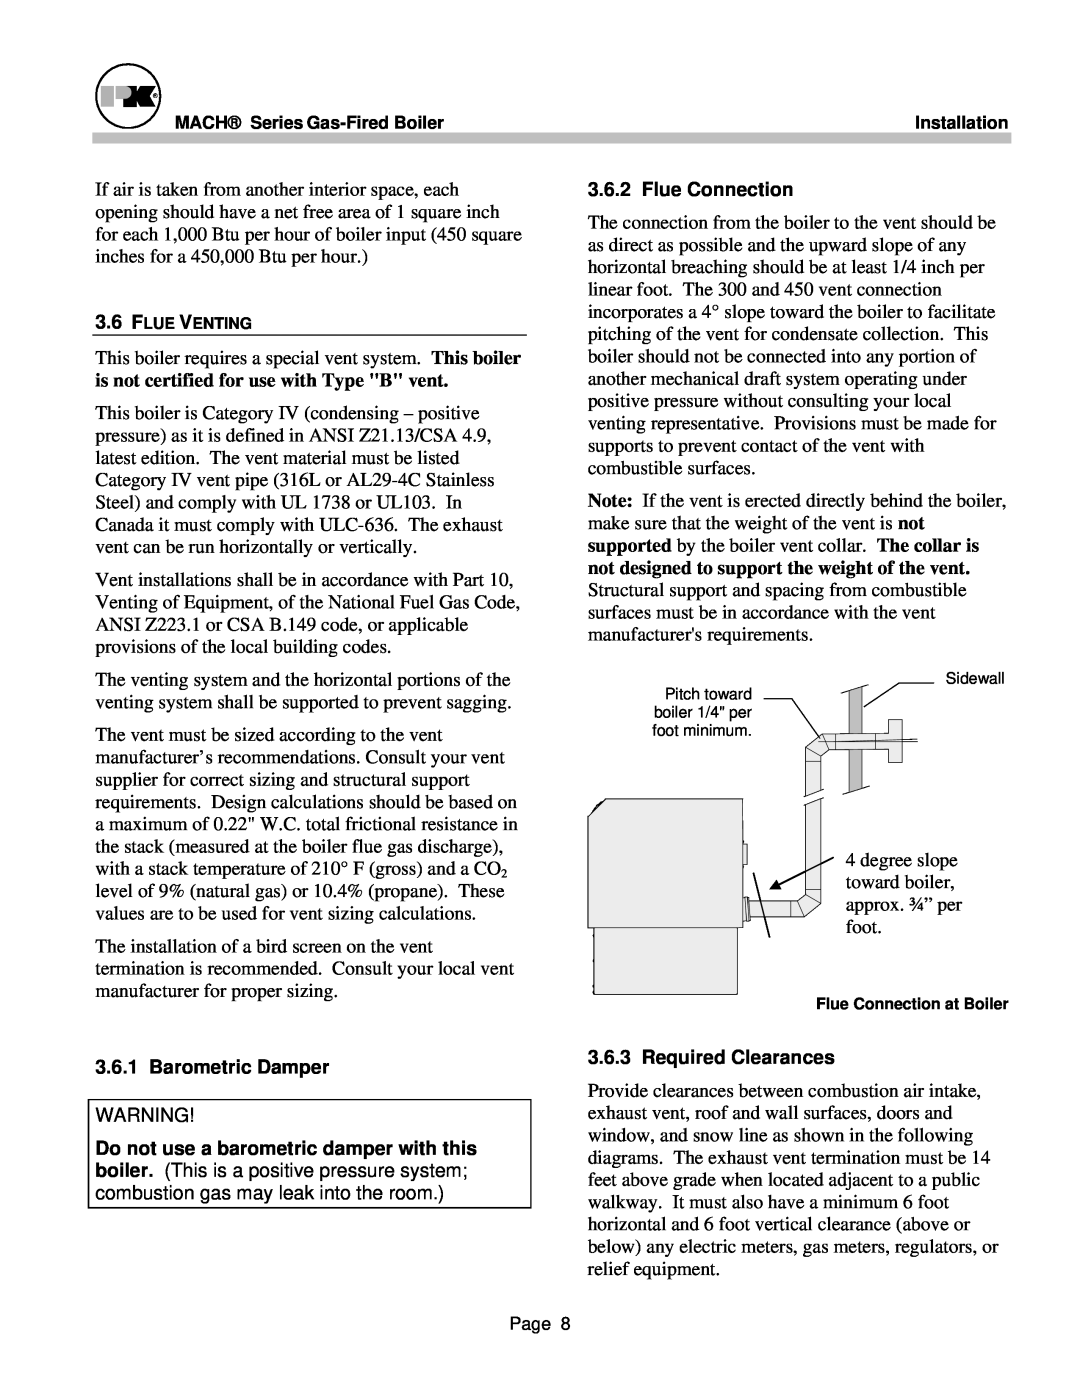 Patterson-Kelley MACH-05 manual Barometric Damper, Flue Connection, Required Clearances 